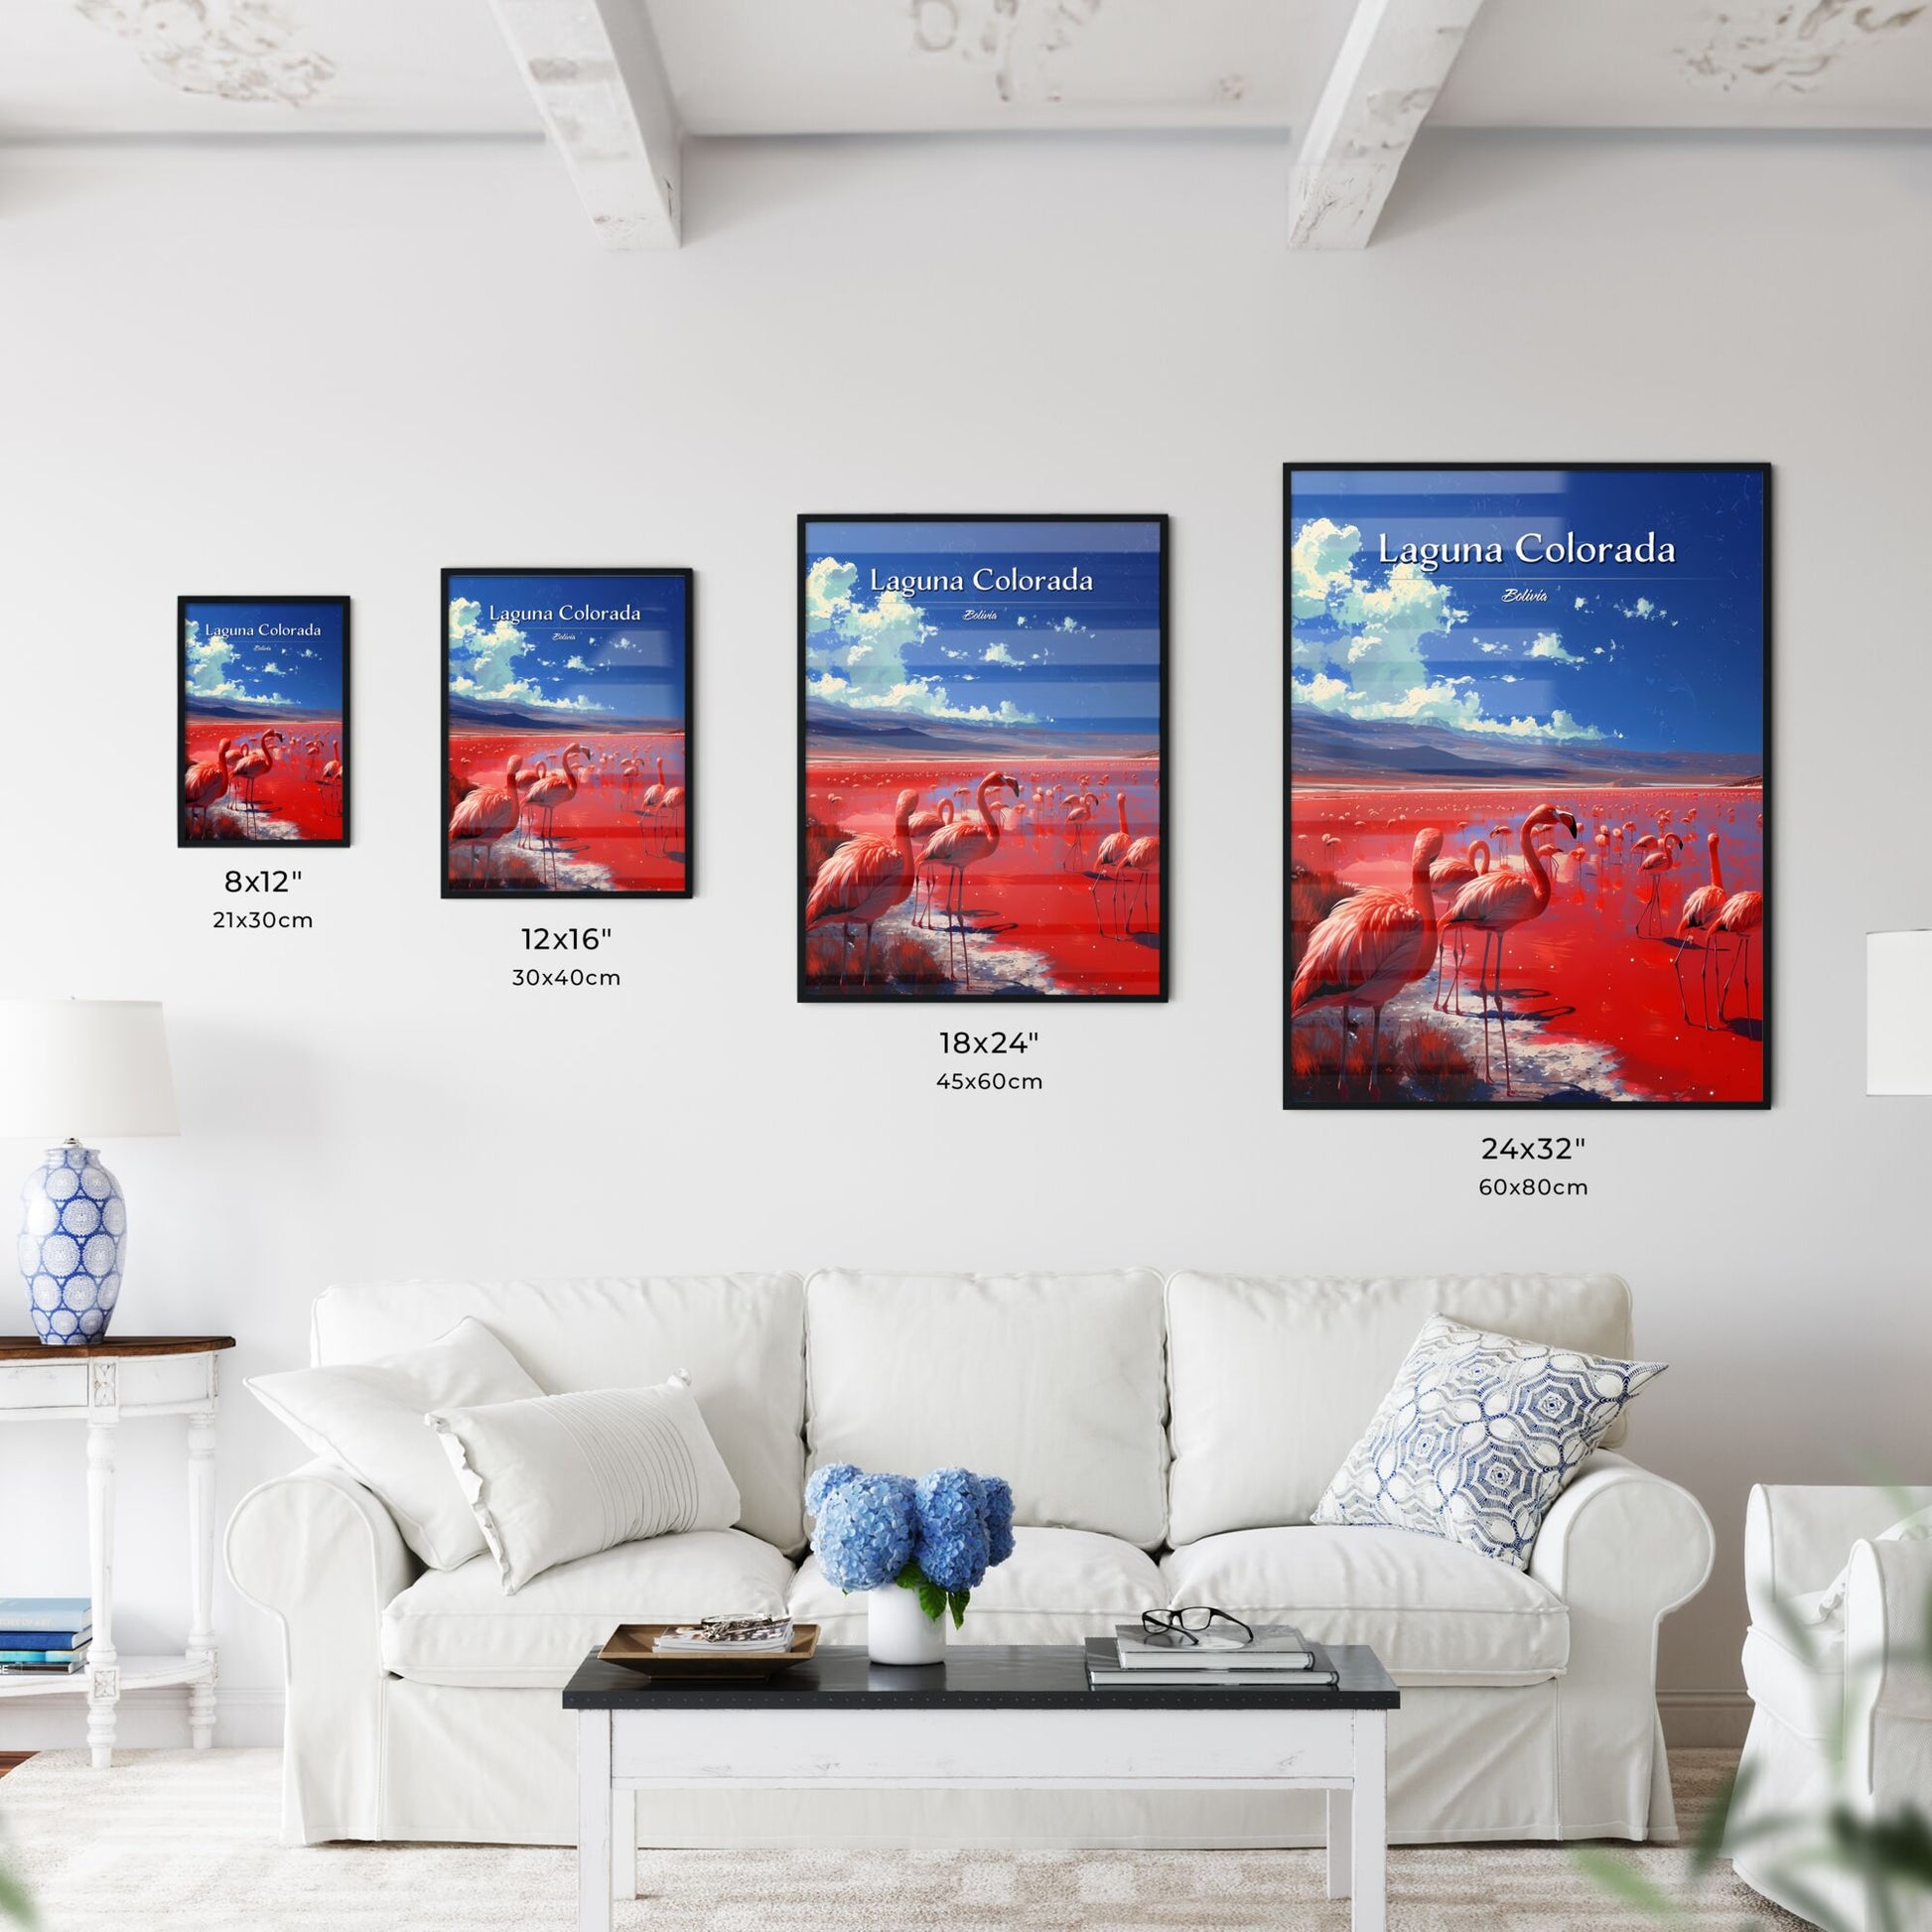 Laguna Colorada, Bolivia - Art print of a group of flamingos in a red lake Default Title